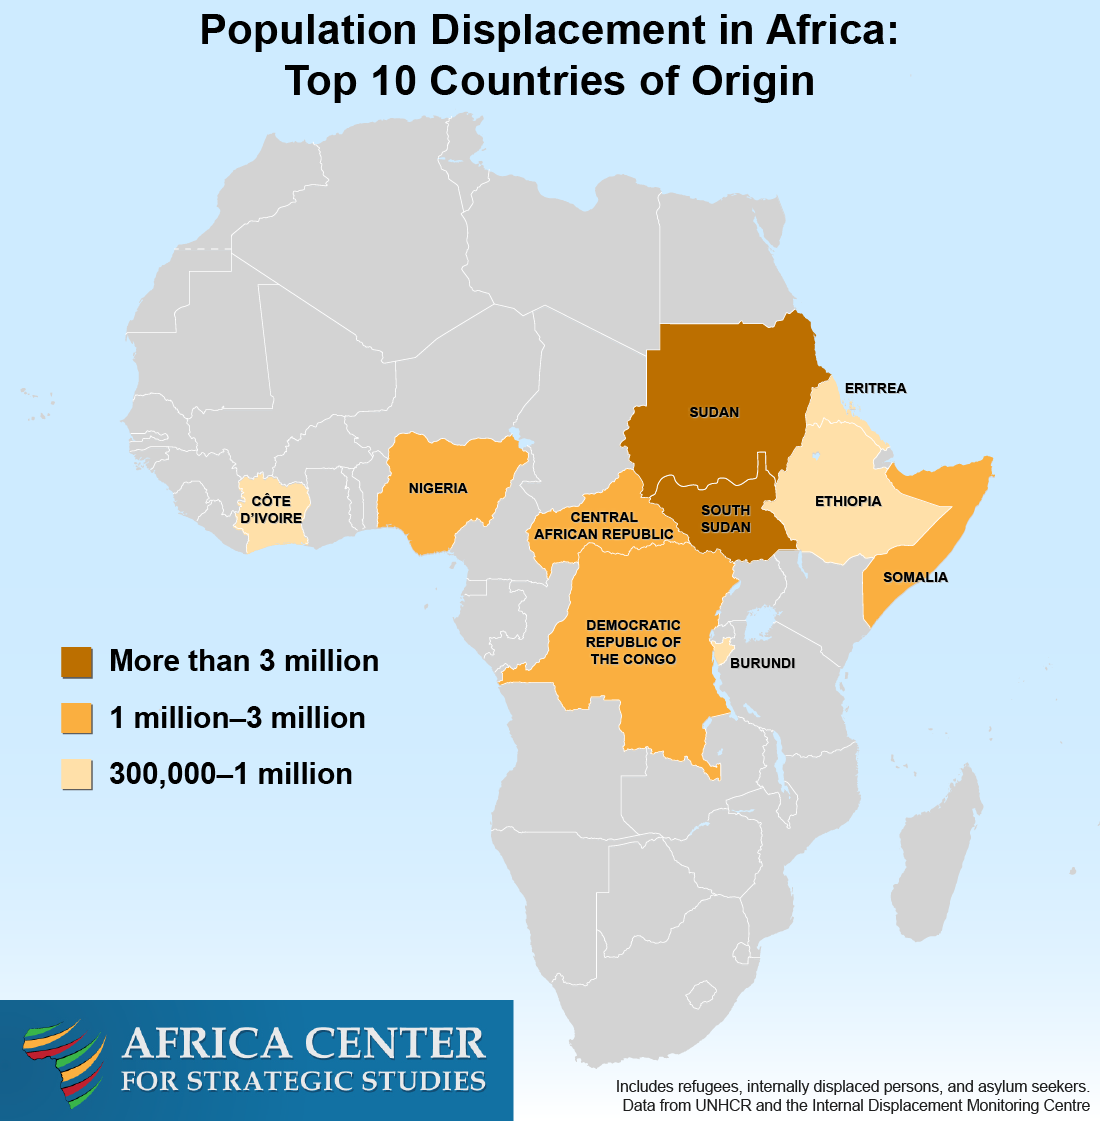 Population Displacement in Africa: Top 10 Countries